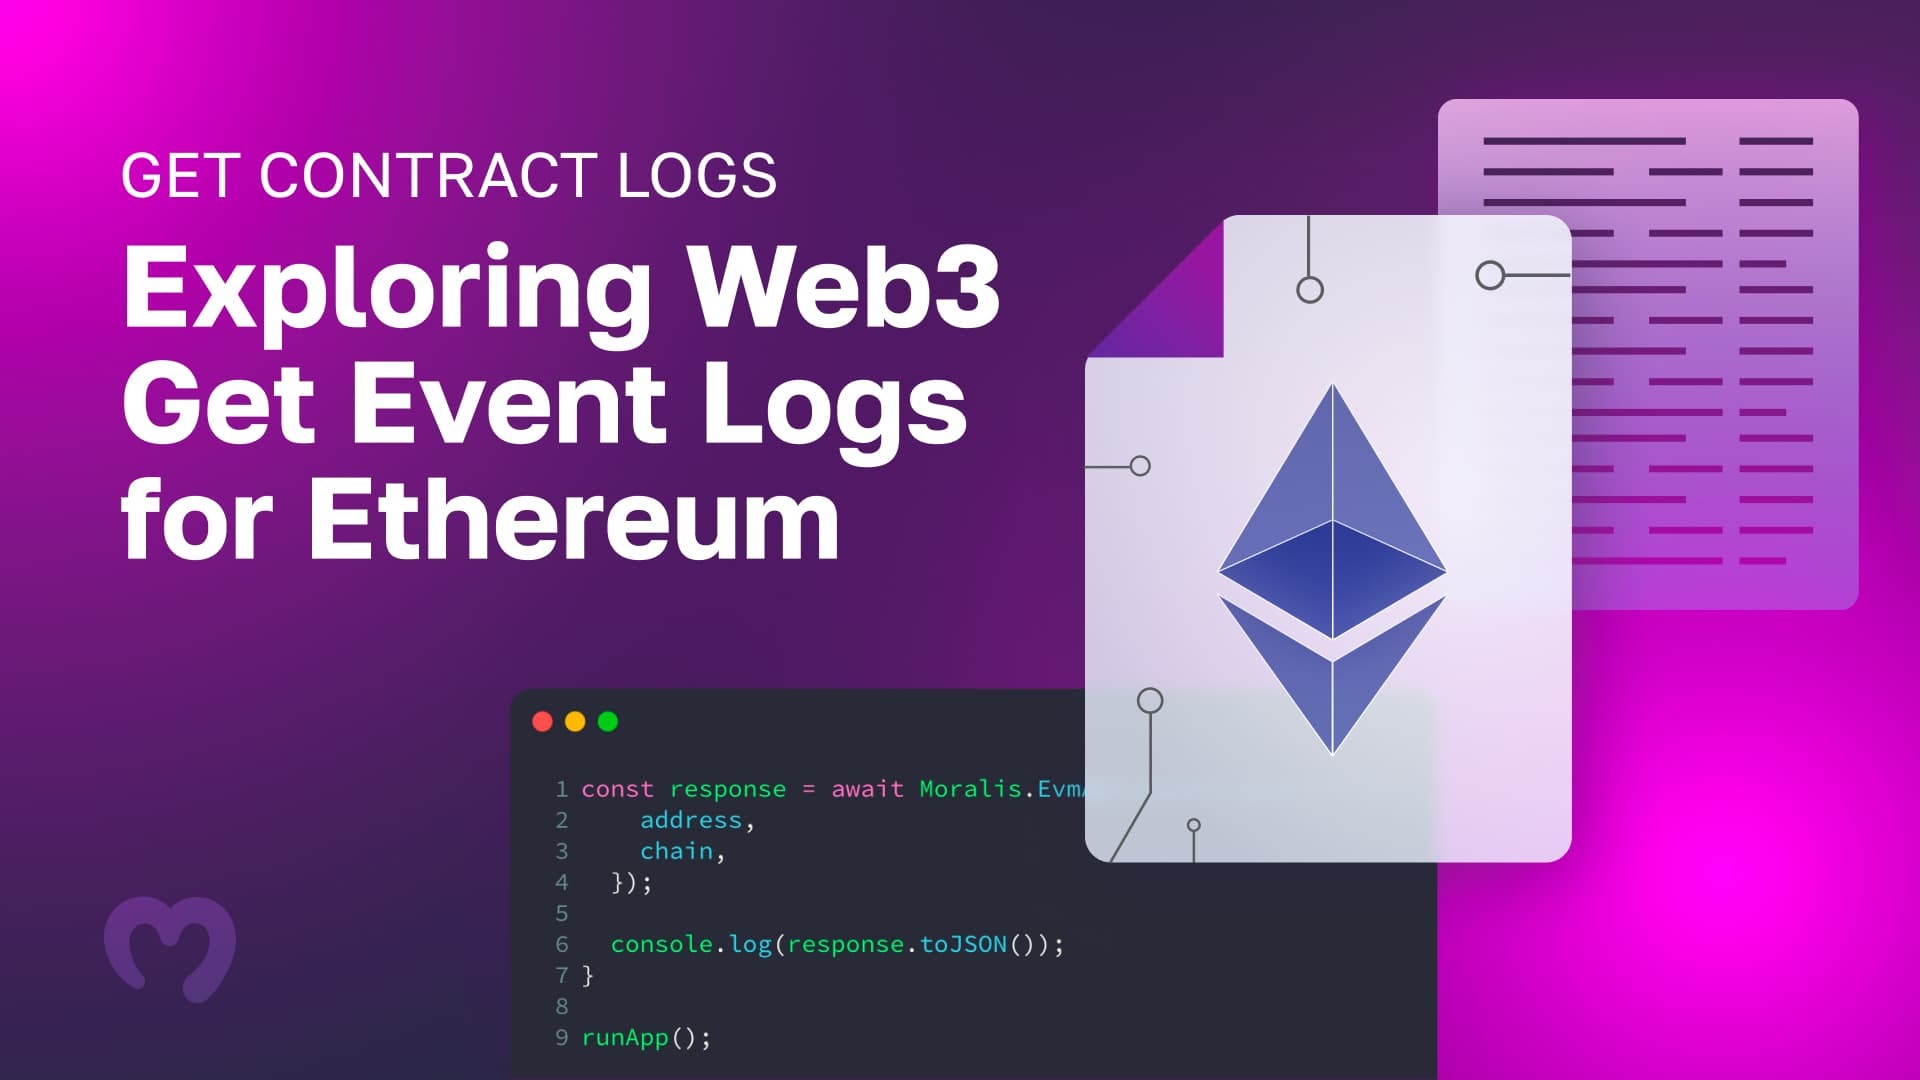 Get Contract Logs - Exploring Web3 Get Event Logs for Ethereum